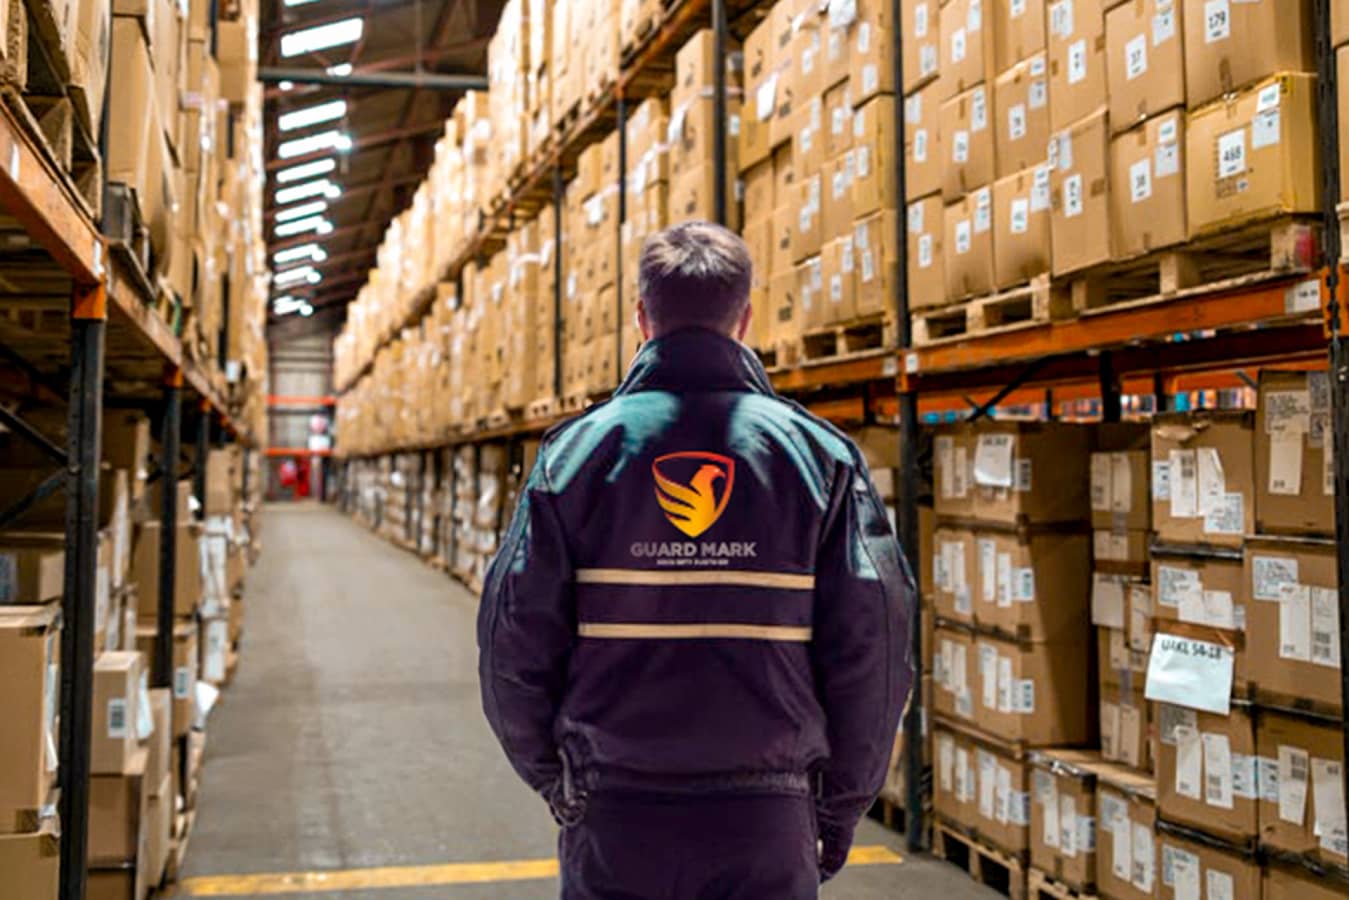 Security guard in Guard Mark uniform performs duties at warehouse or production site, ensuring safety and security.